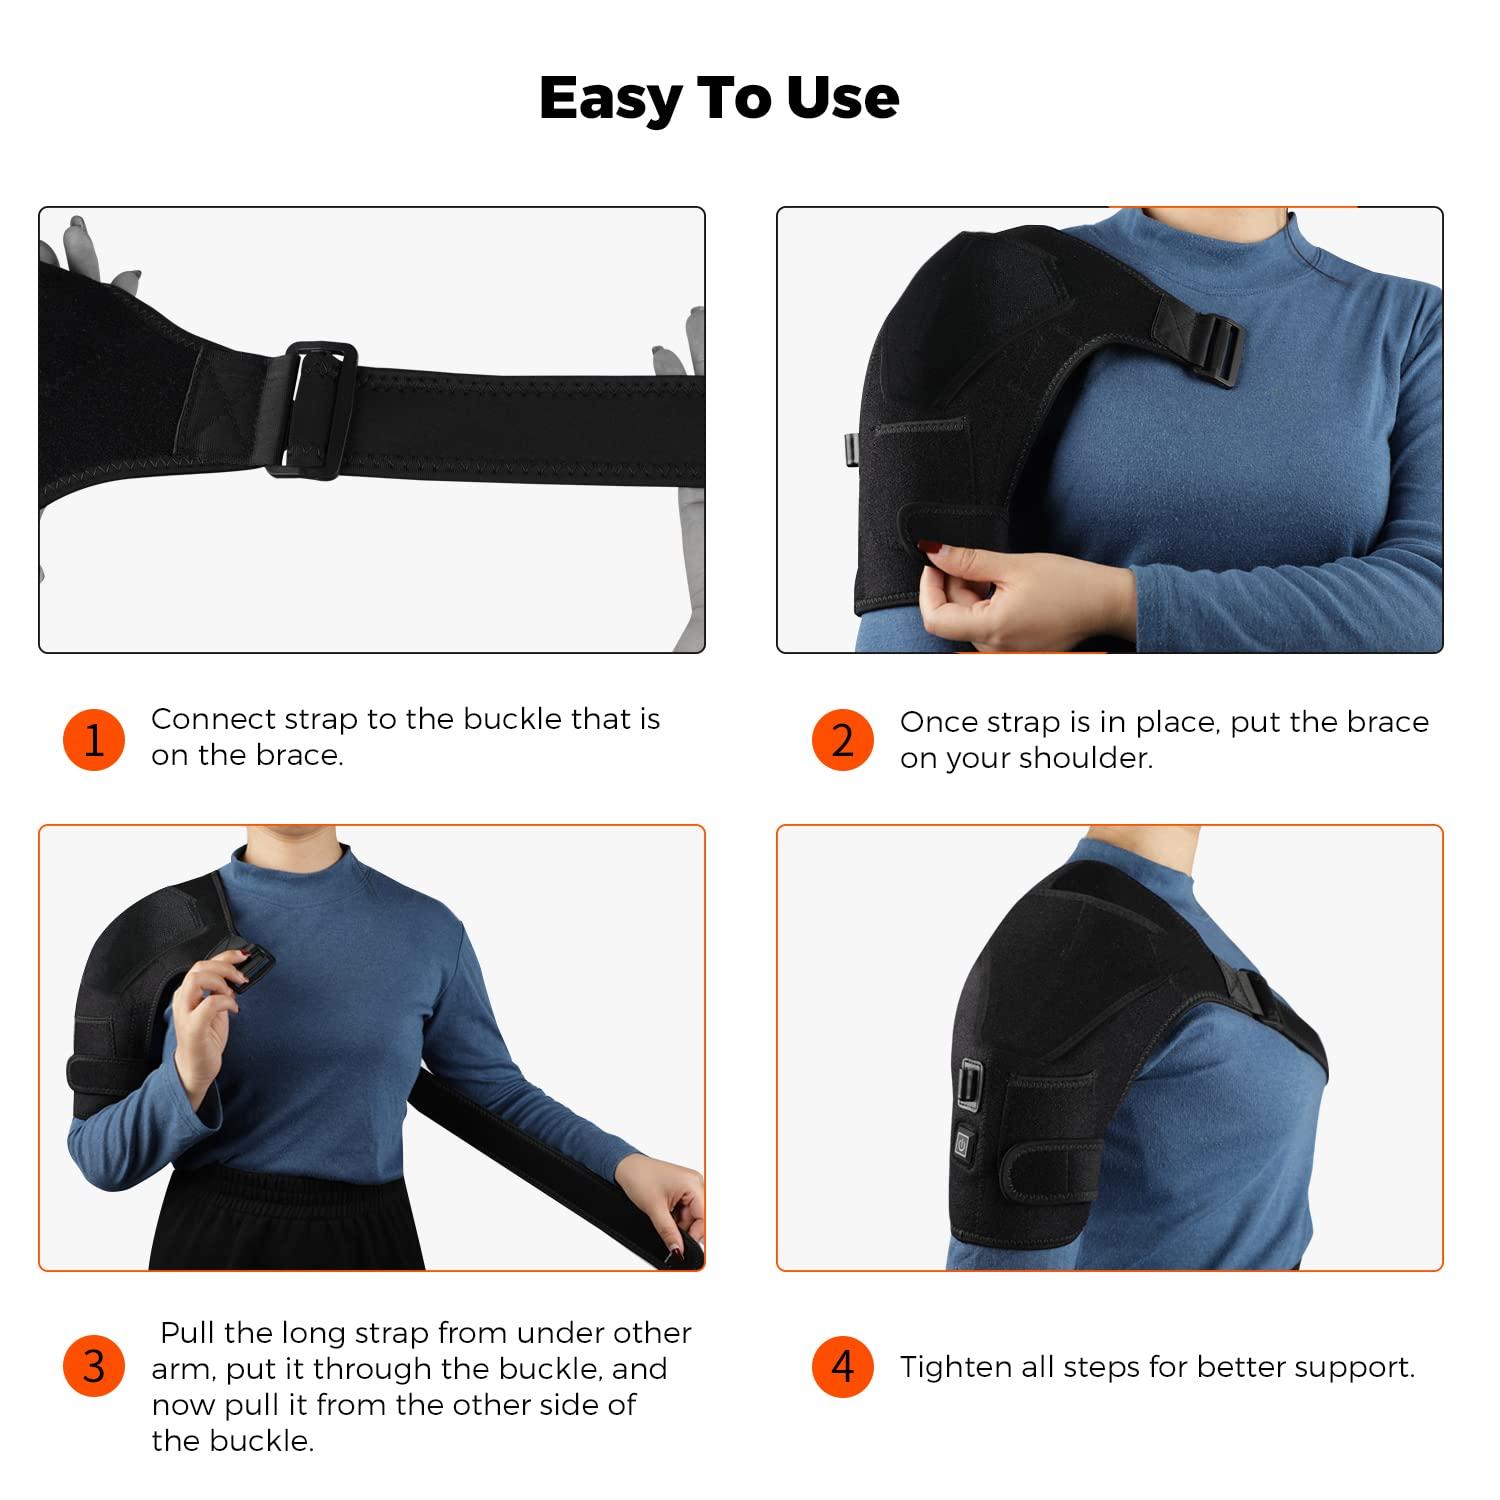 Rishaw Heated Shoulder Support Brace,Heated Shoulder Massage with